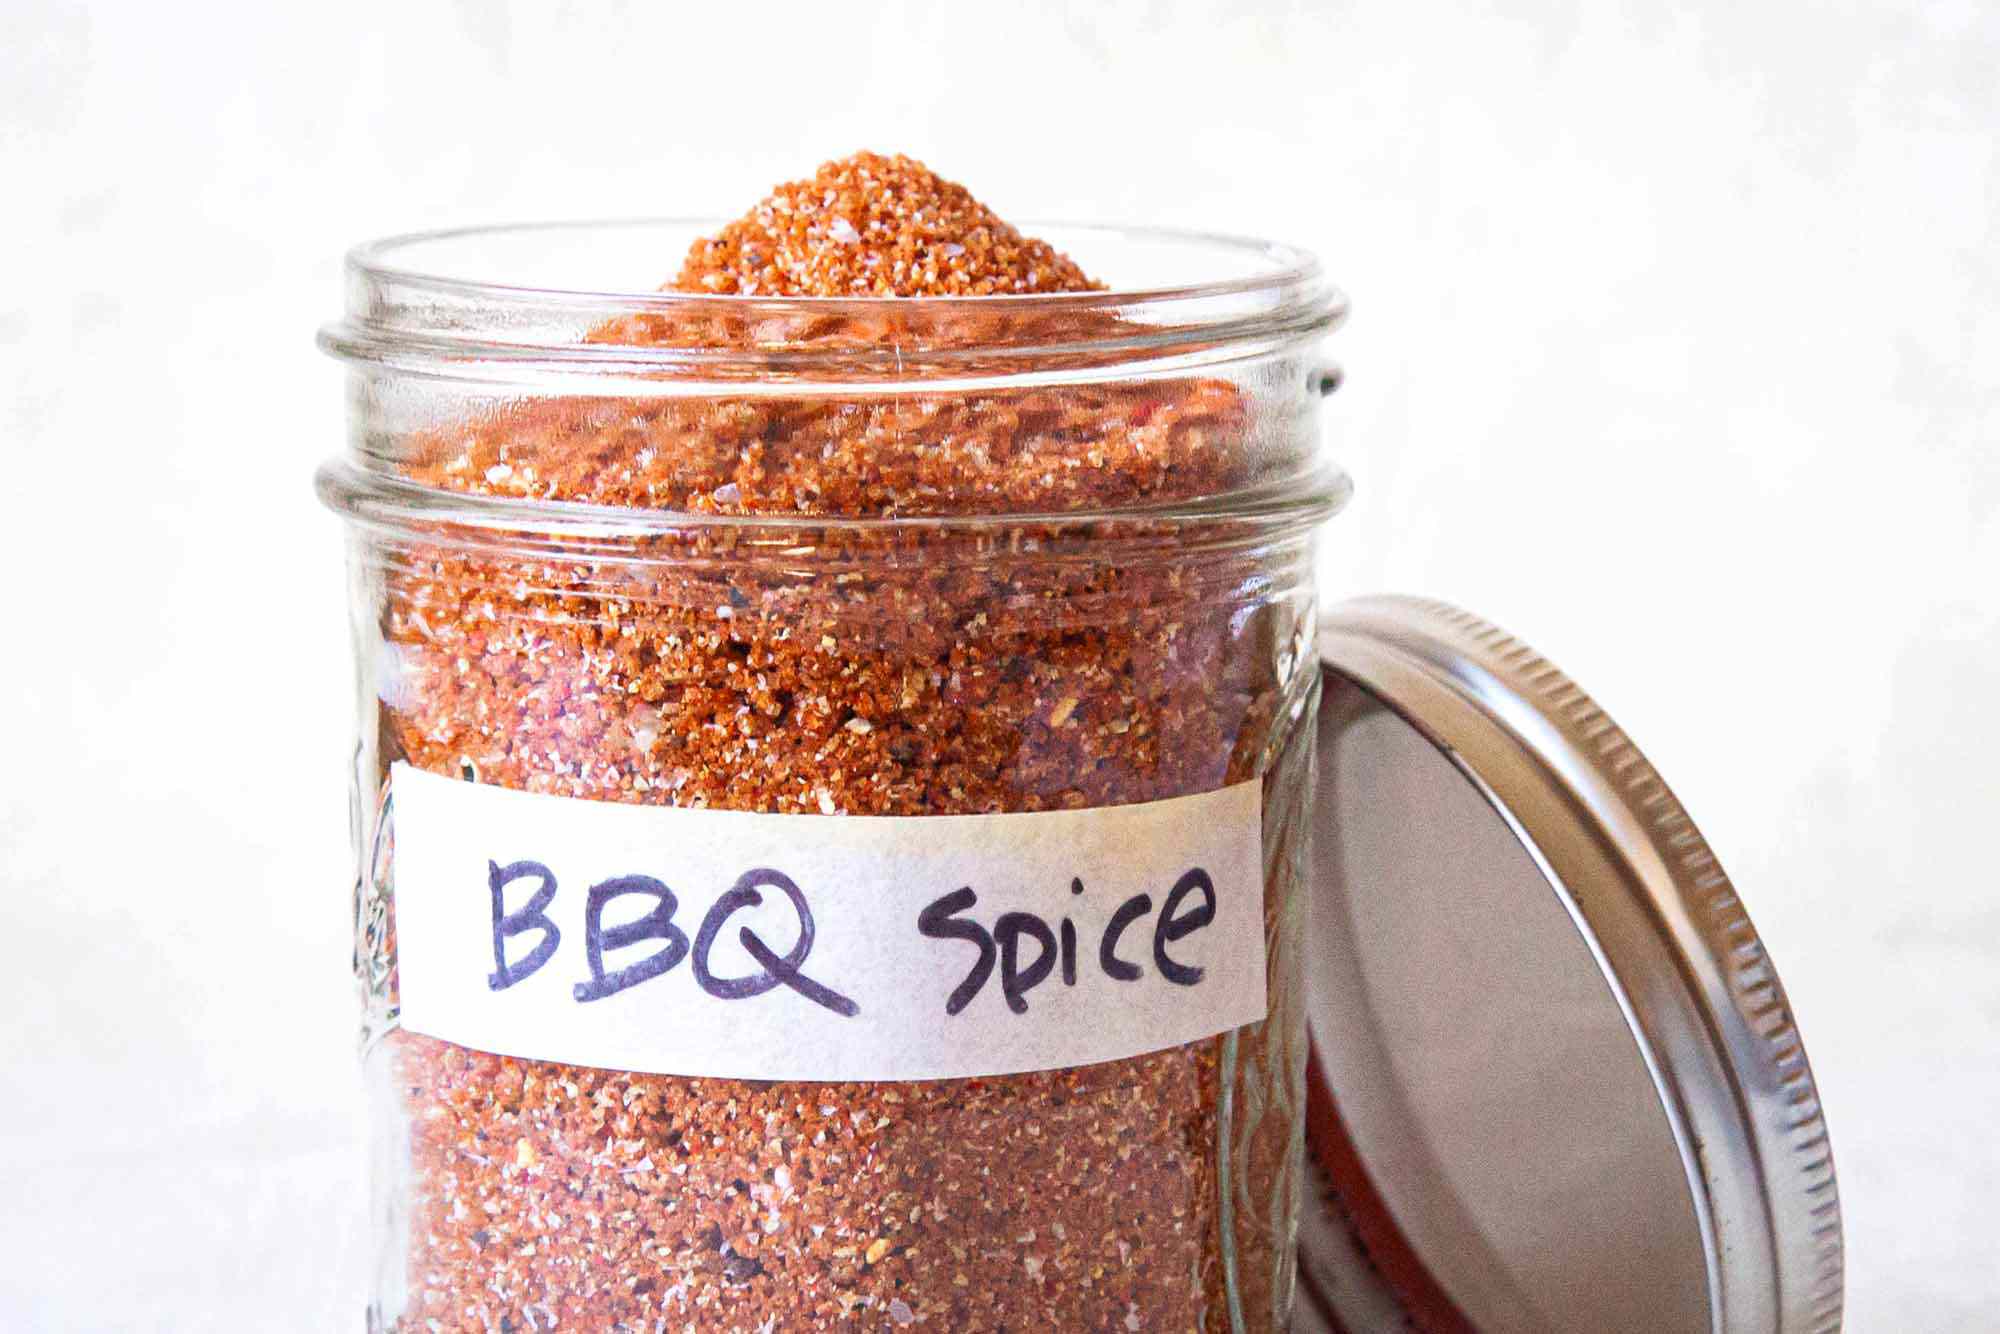 Recipe for making BBQ rub at home.